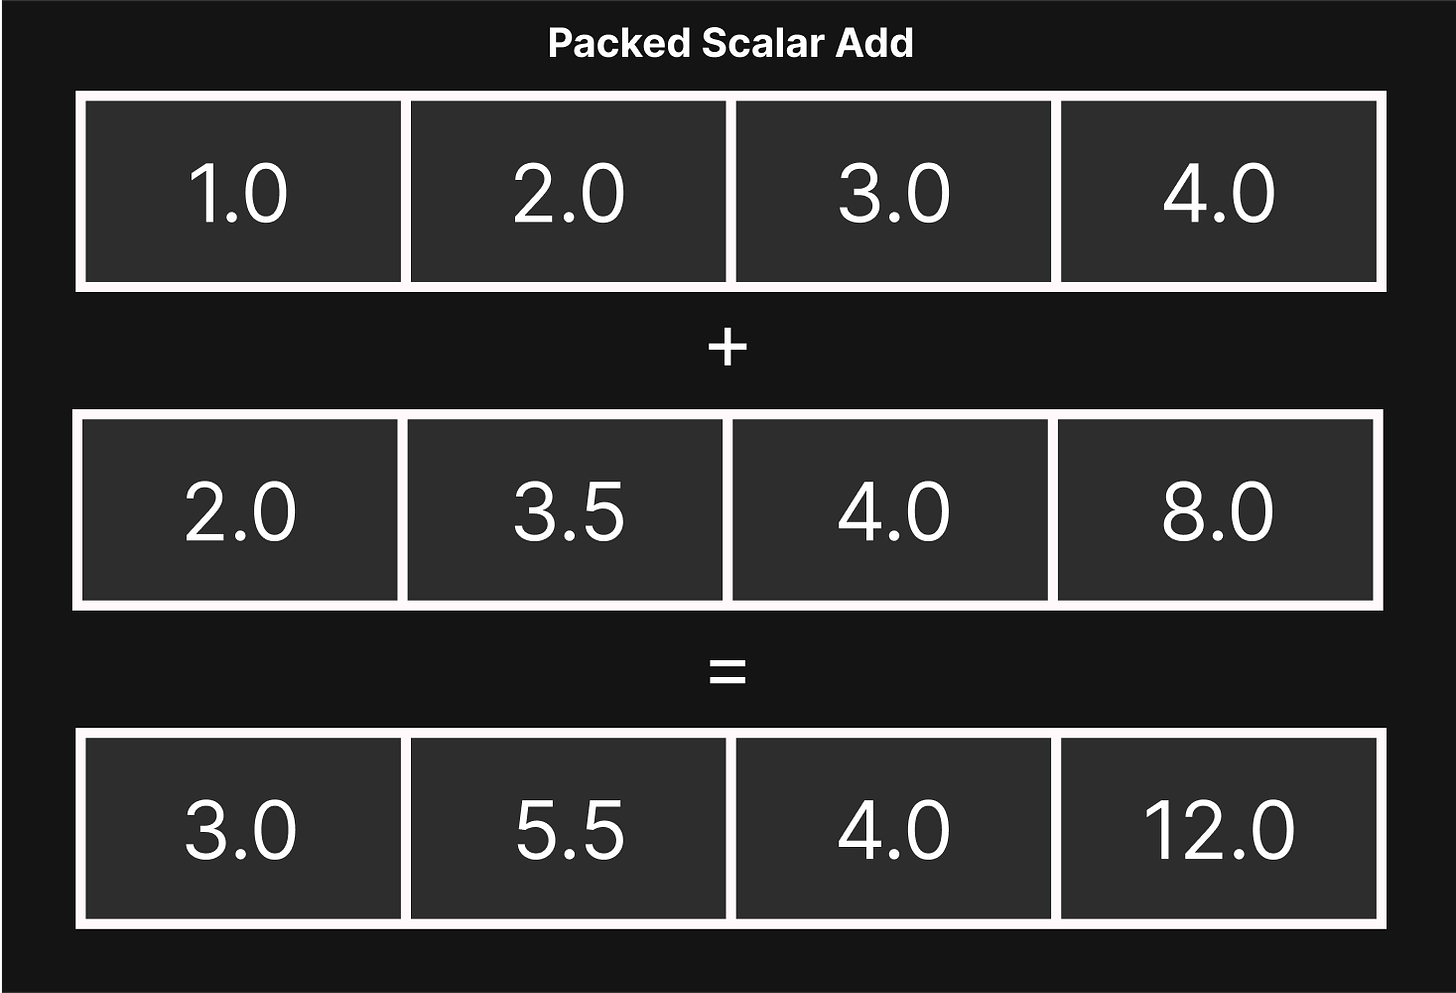 Example of a packed scalar addition